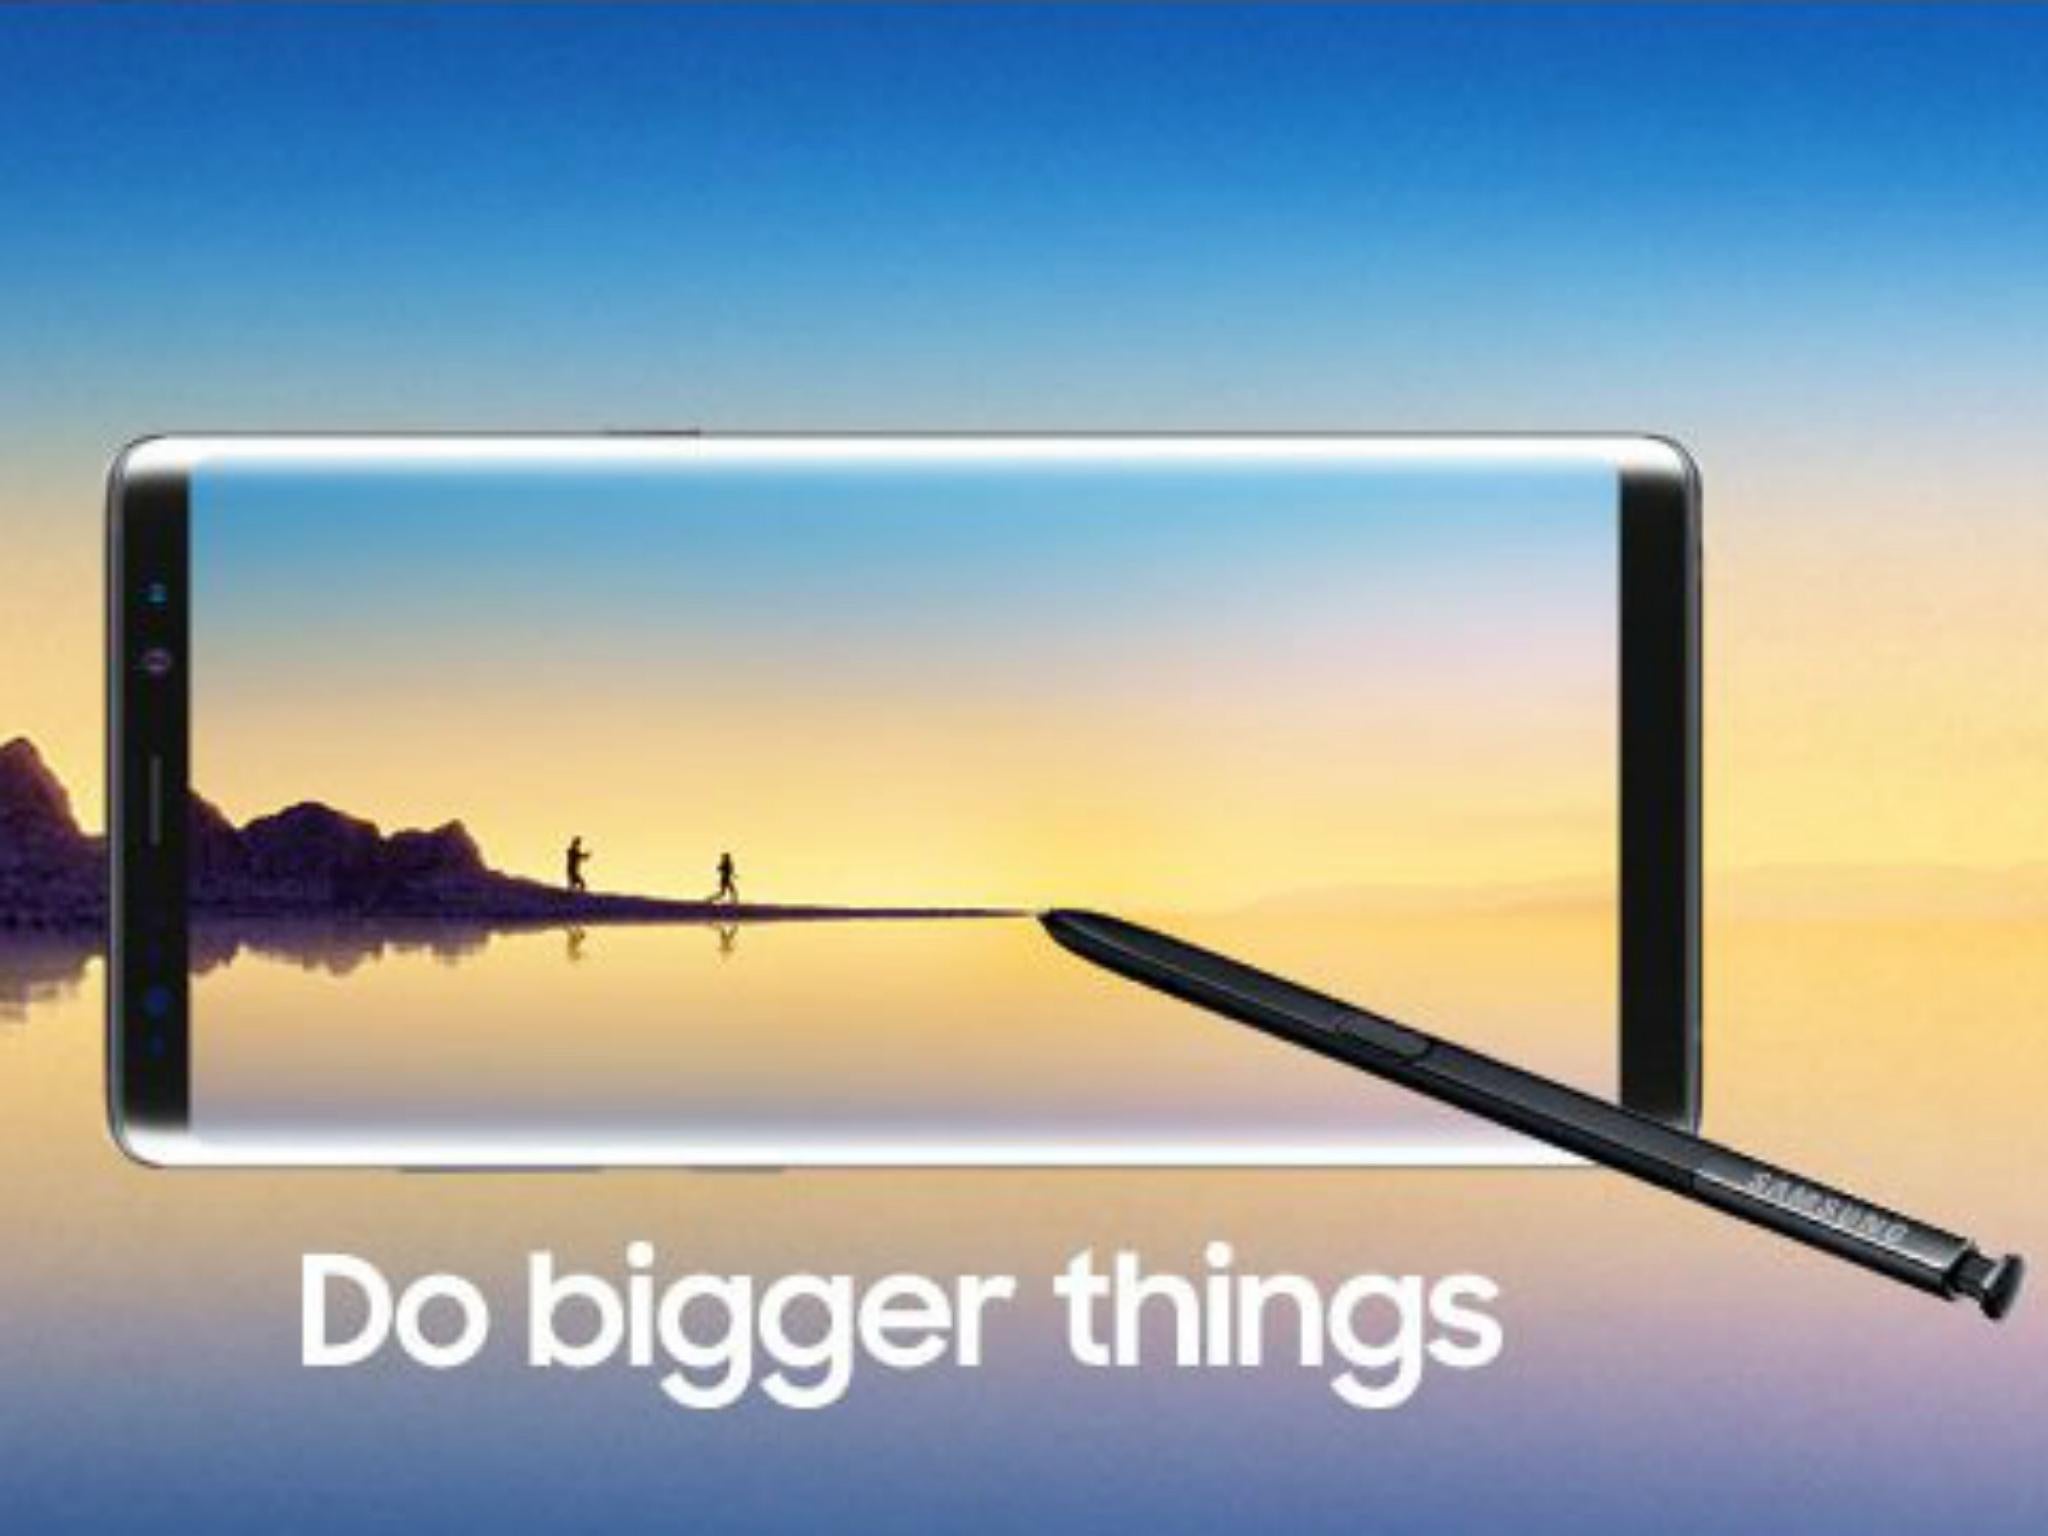 The Note 8 is expected to be larger than the enormous Samsung Galaxy S8 Plus